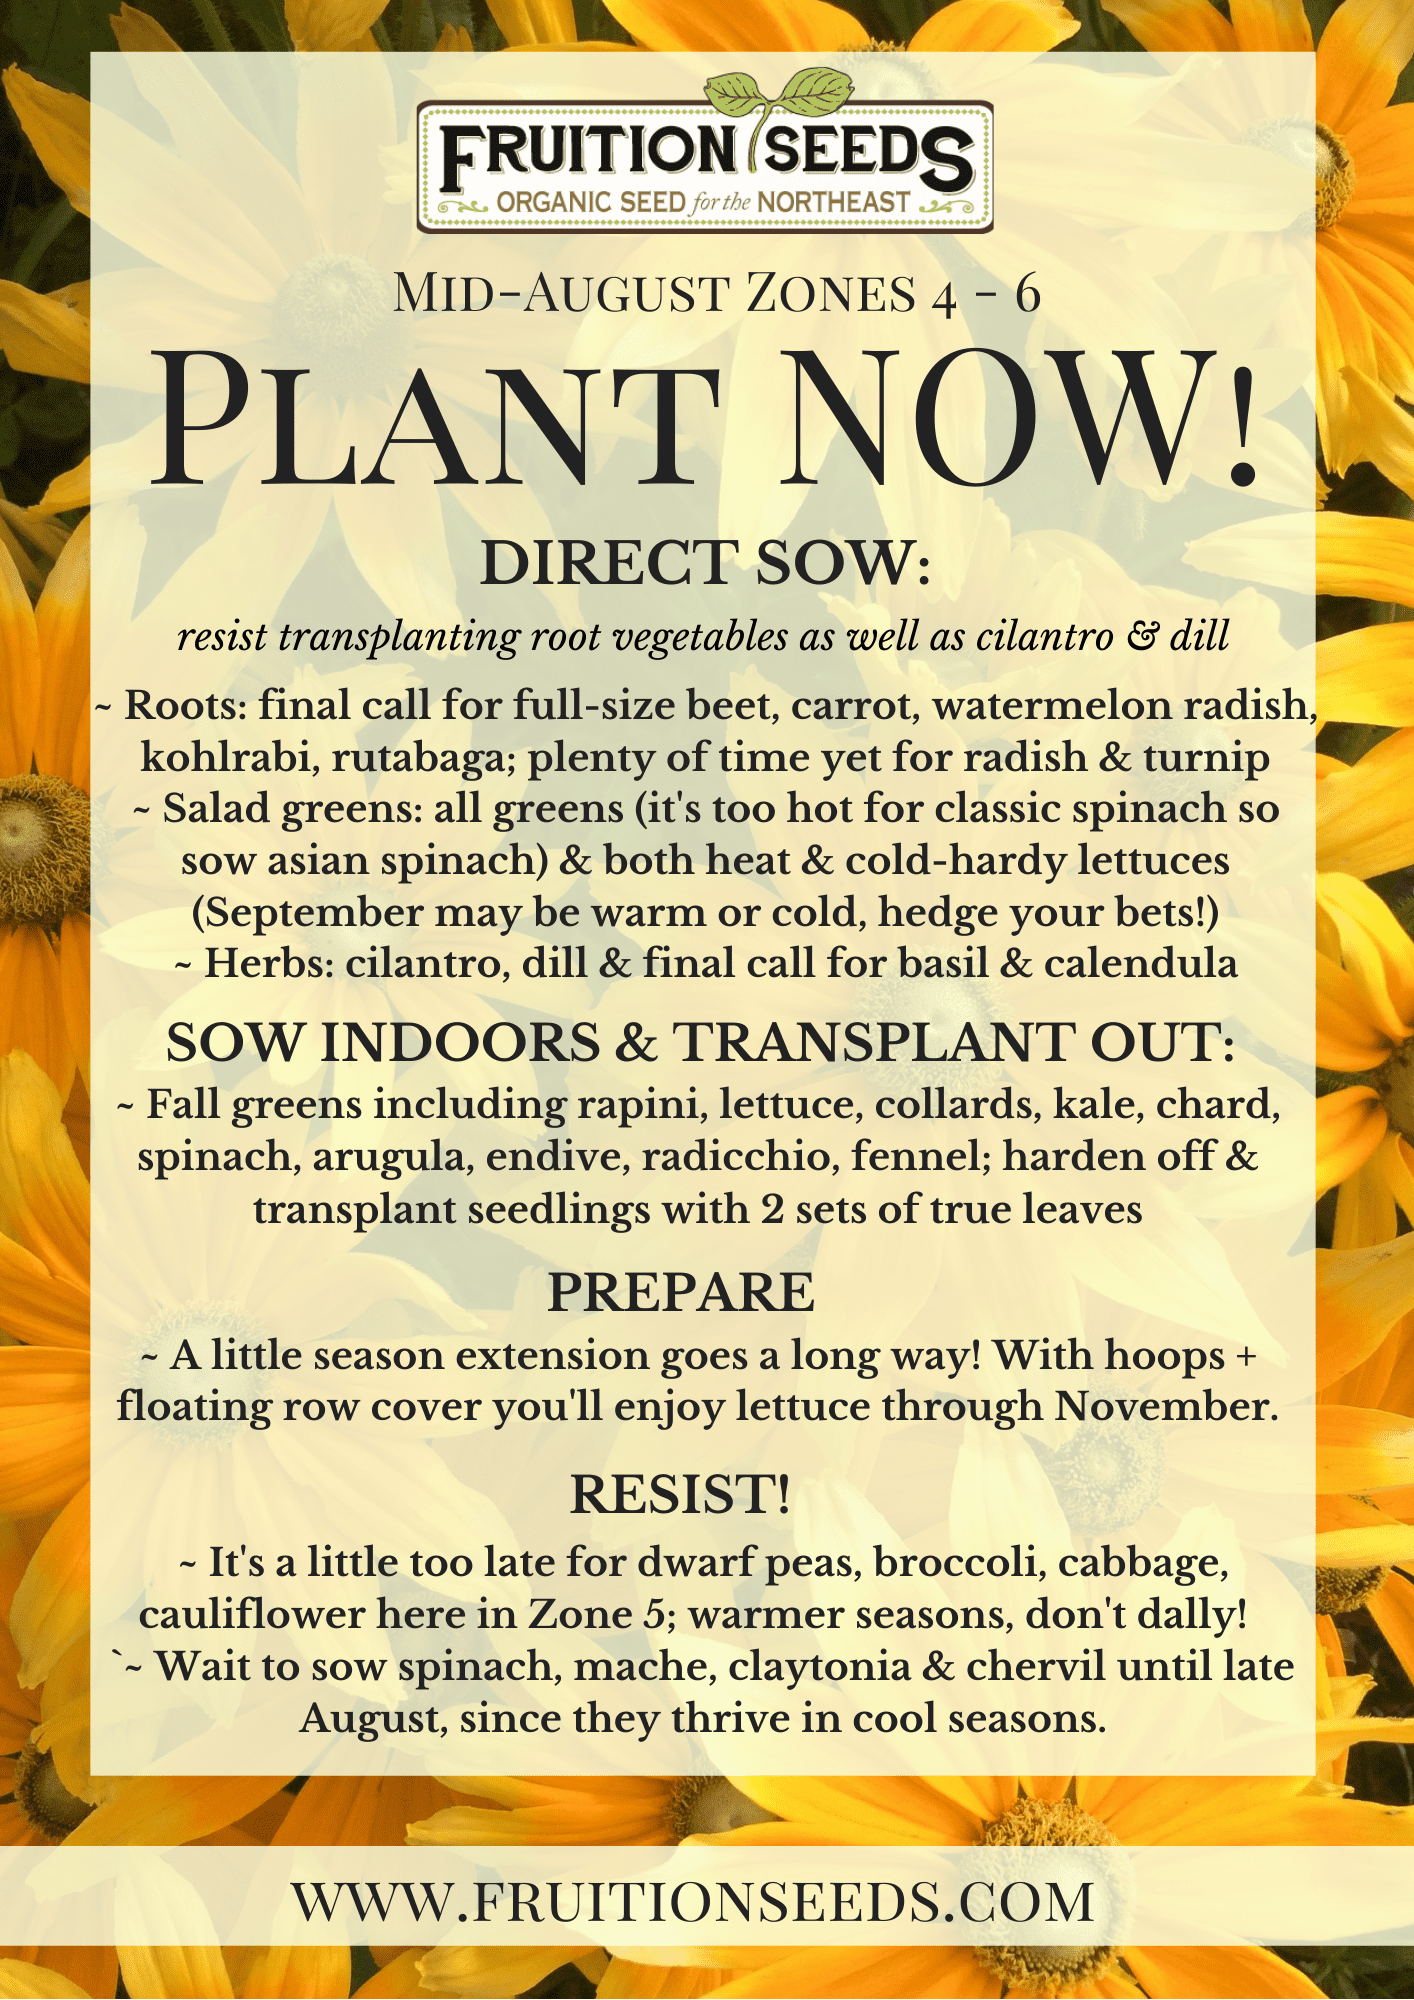 Growing Guide for August Plant Now